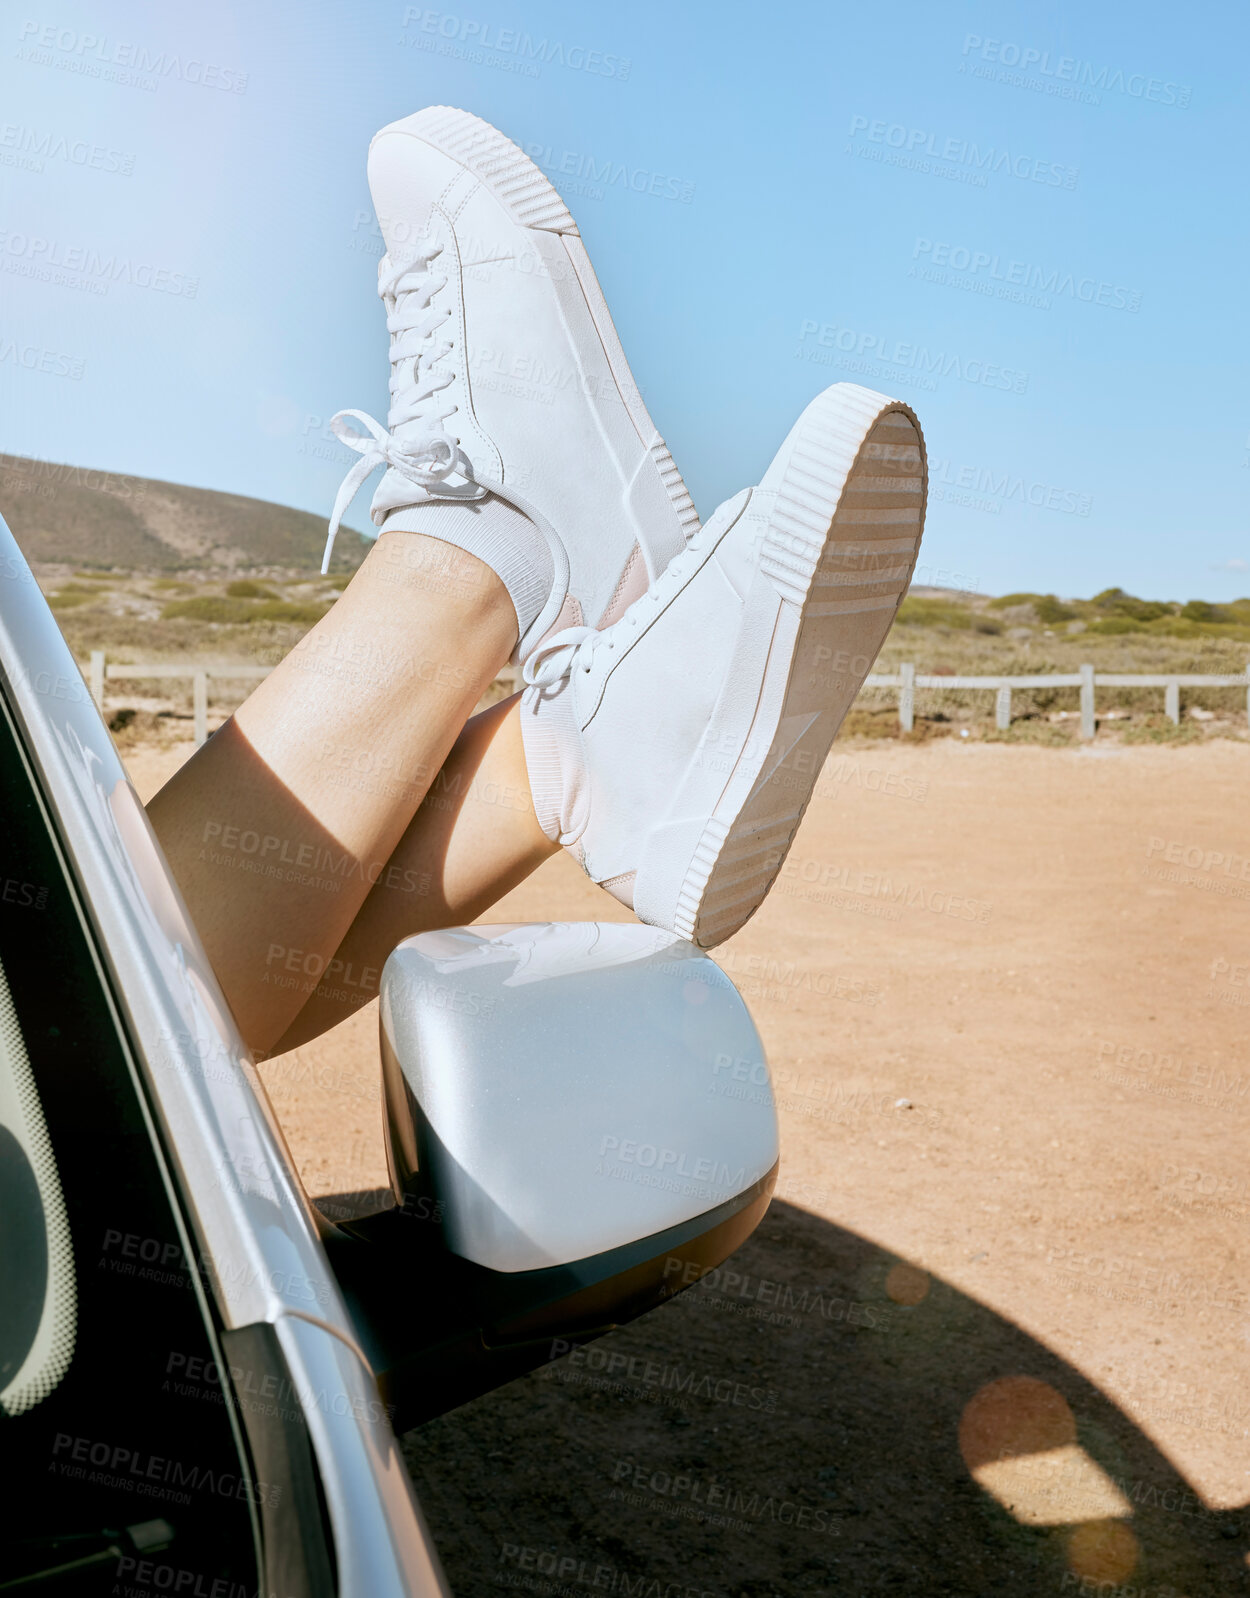 Buy stock photo Relax, woman feet out of window and road trip in nature, enjoying freedom of travel in car on summer vacation. Blue sky, journey and shoes out of car window, adventure drive in African countryside.